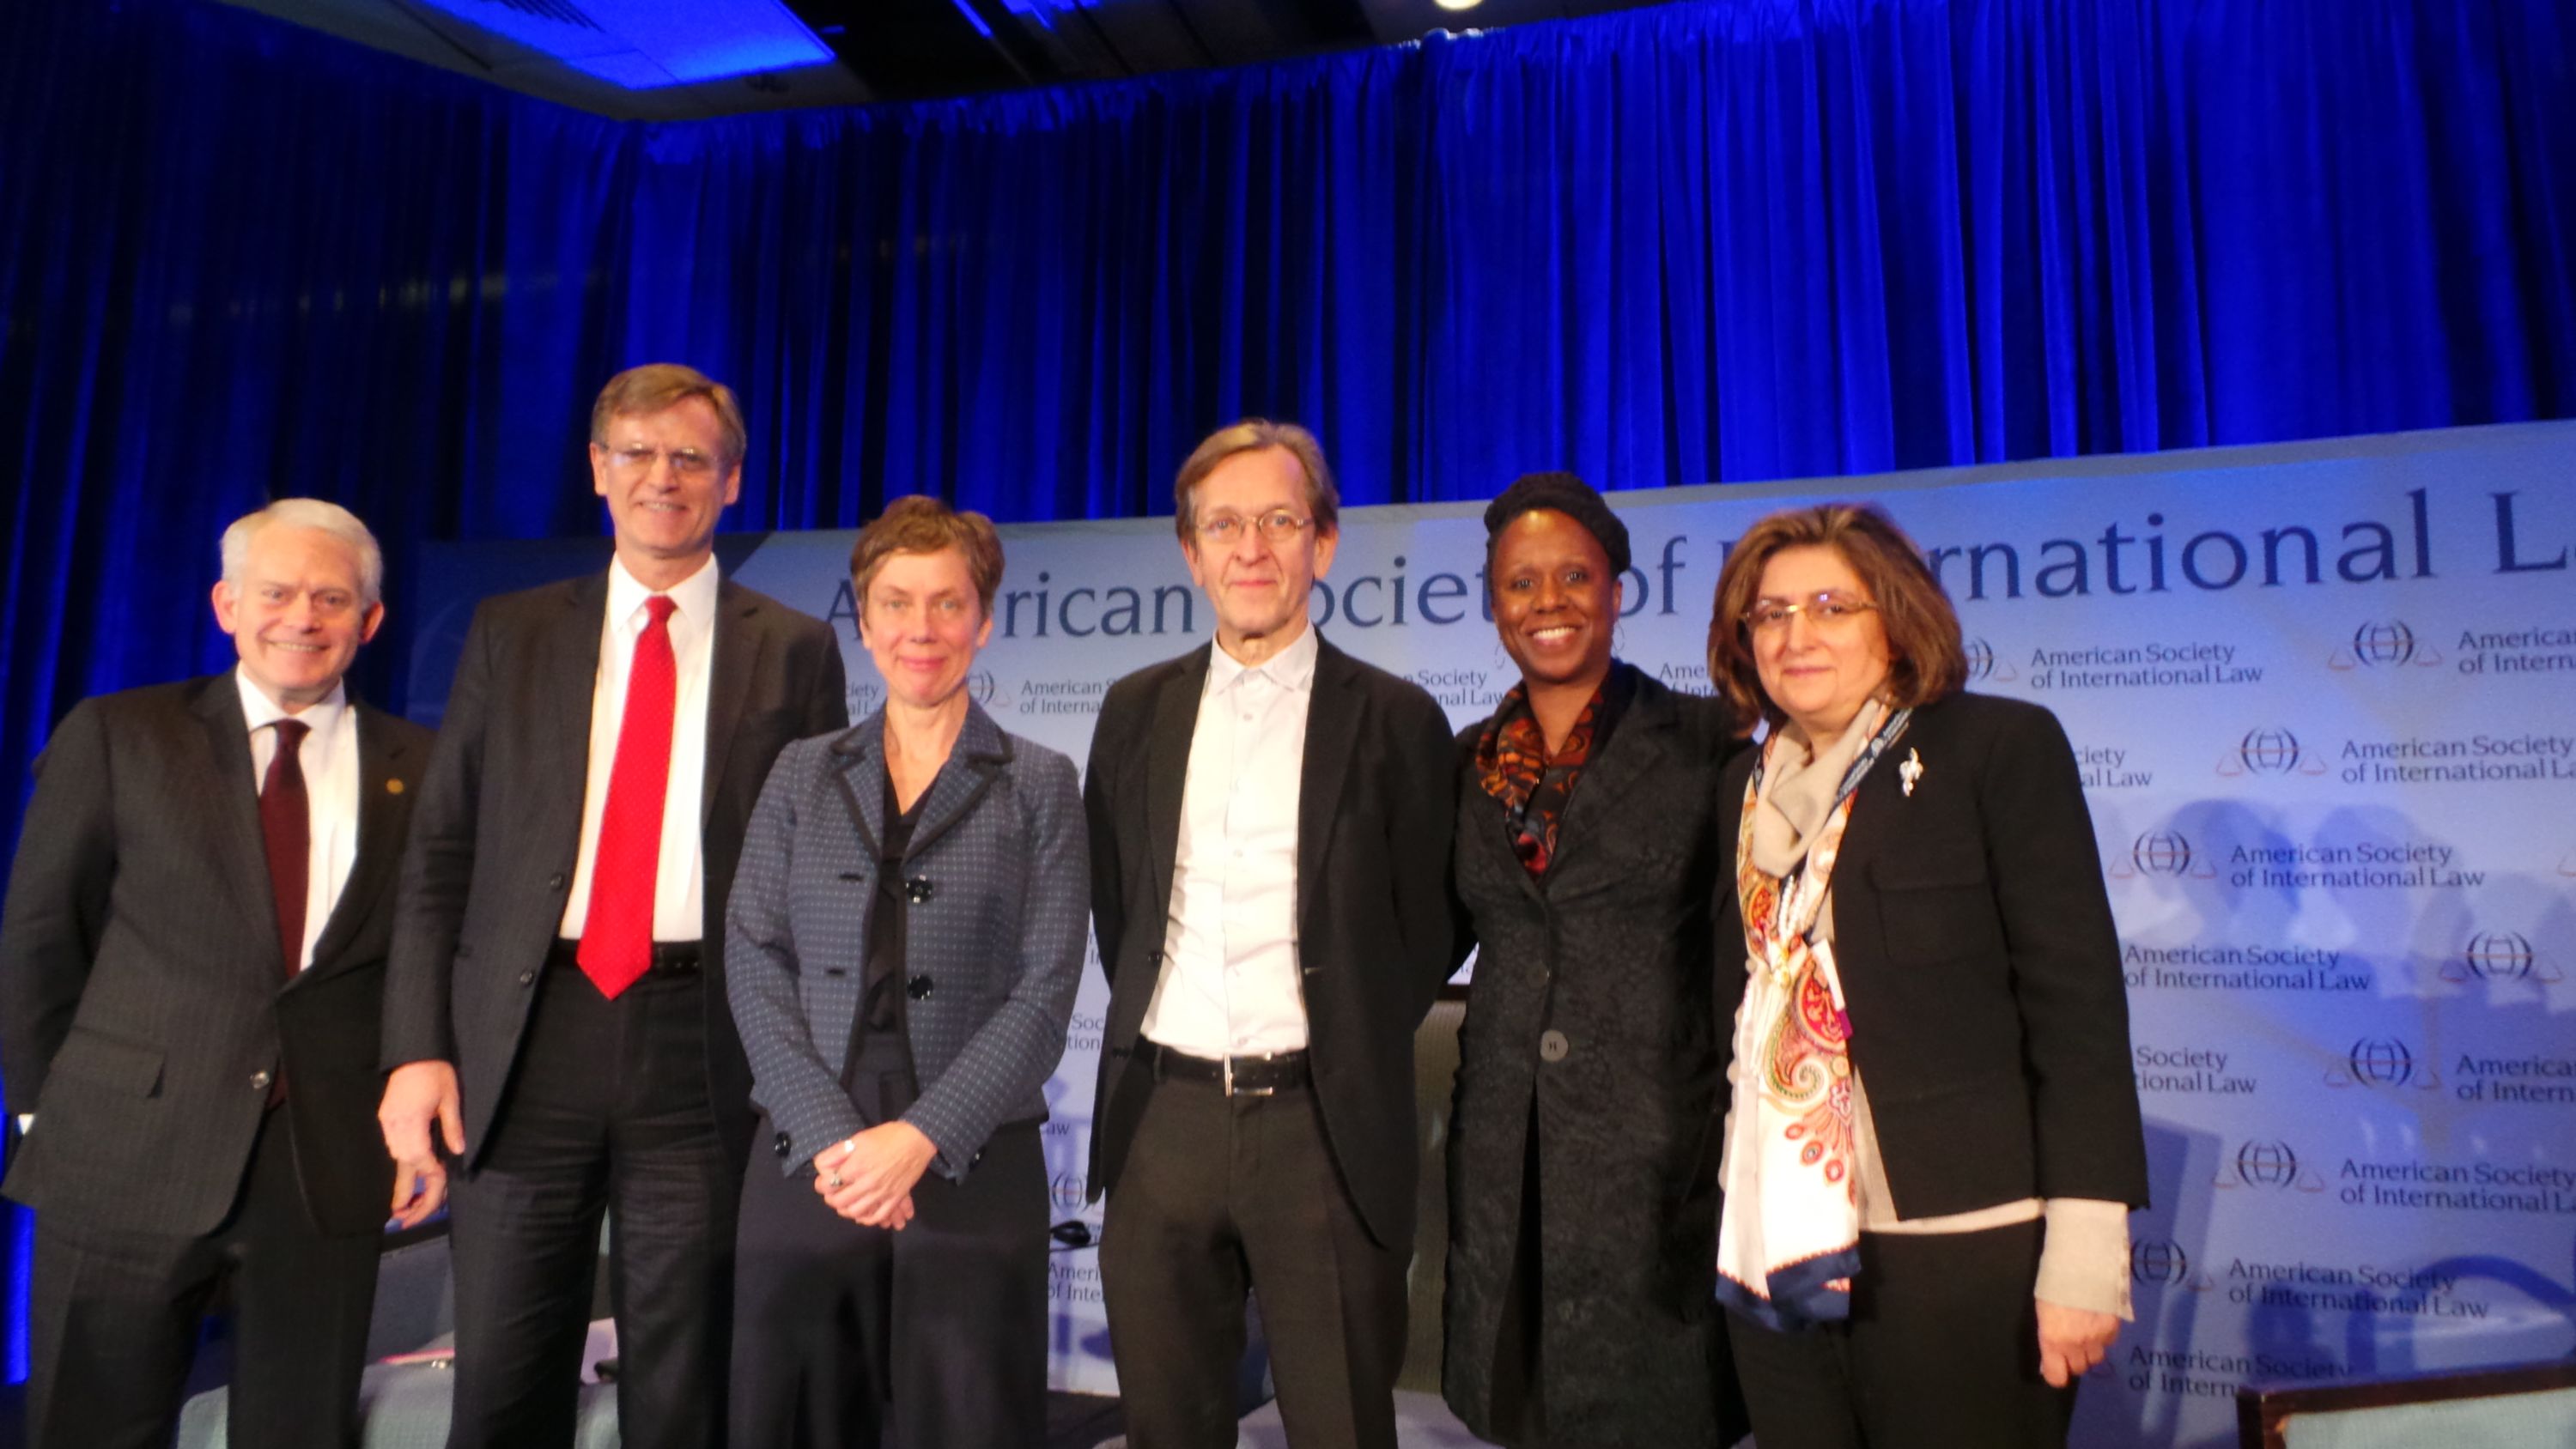 From left to right: Mark Agrast, Executive Director of ASIL; Sean D. Murphy, President of ASIL; Anne Orford, Distinguished Discussant; Martti Koskenniemi, Grotius Lectureri; Dean Camille Nelson, AUWCL; Professor Padideh Ala'i, Director, International & Comparative Legal Studies, AUWCL